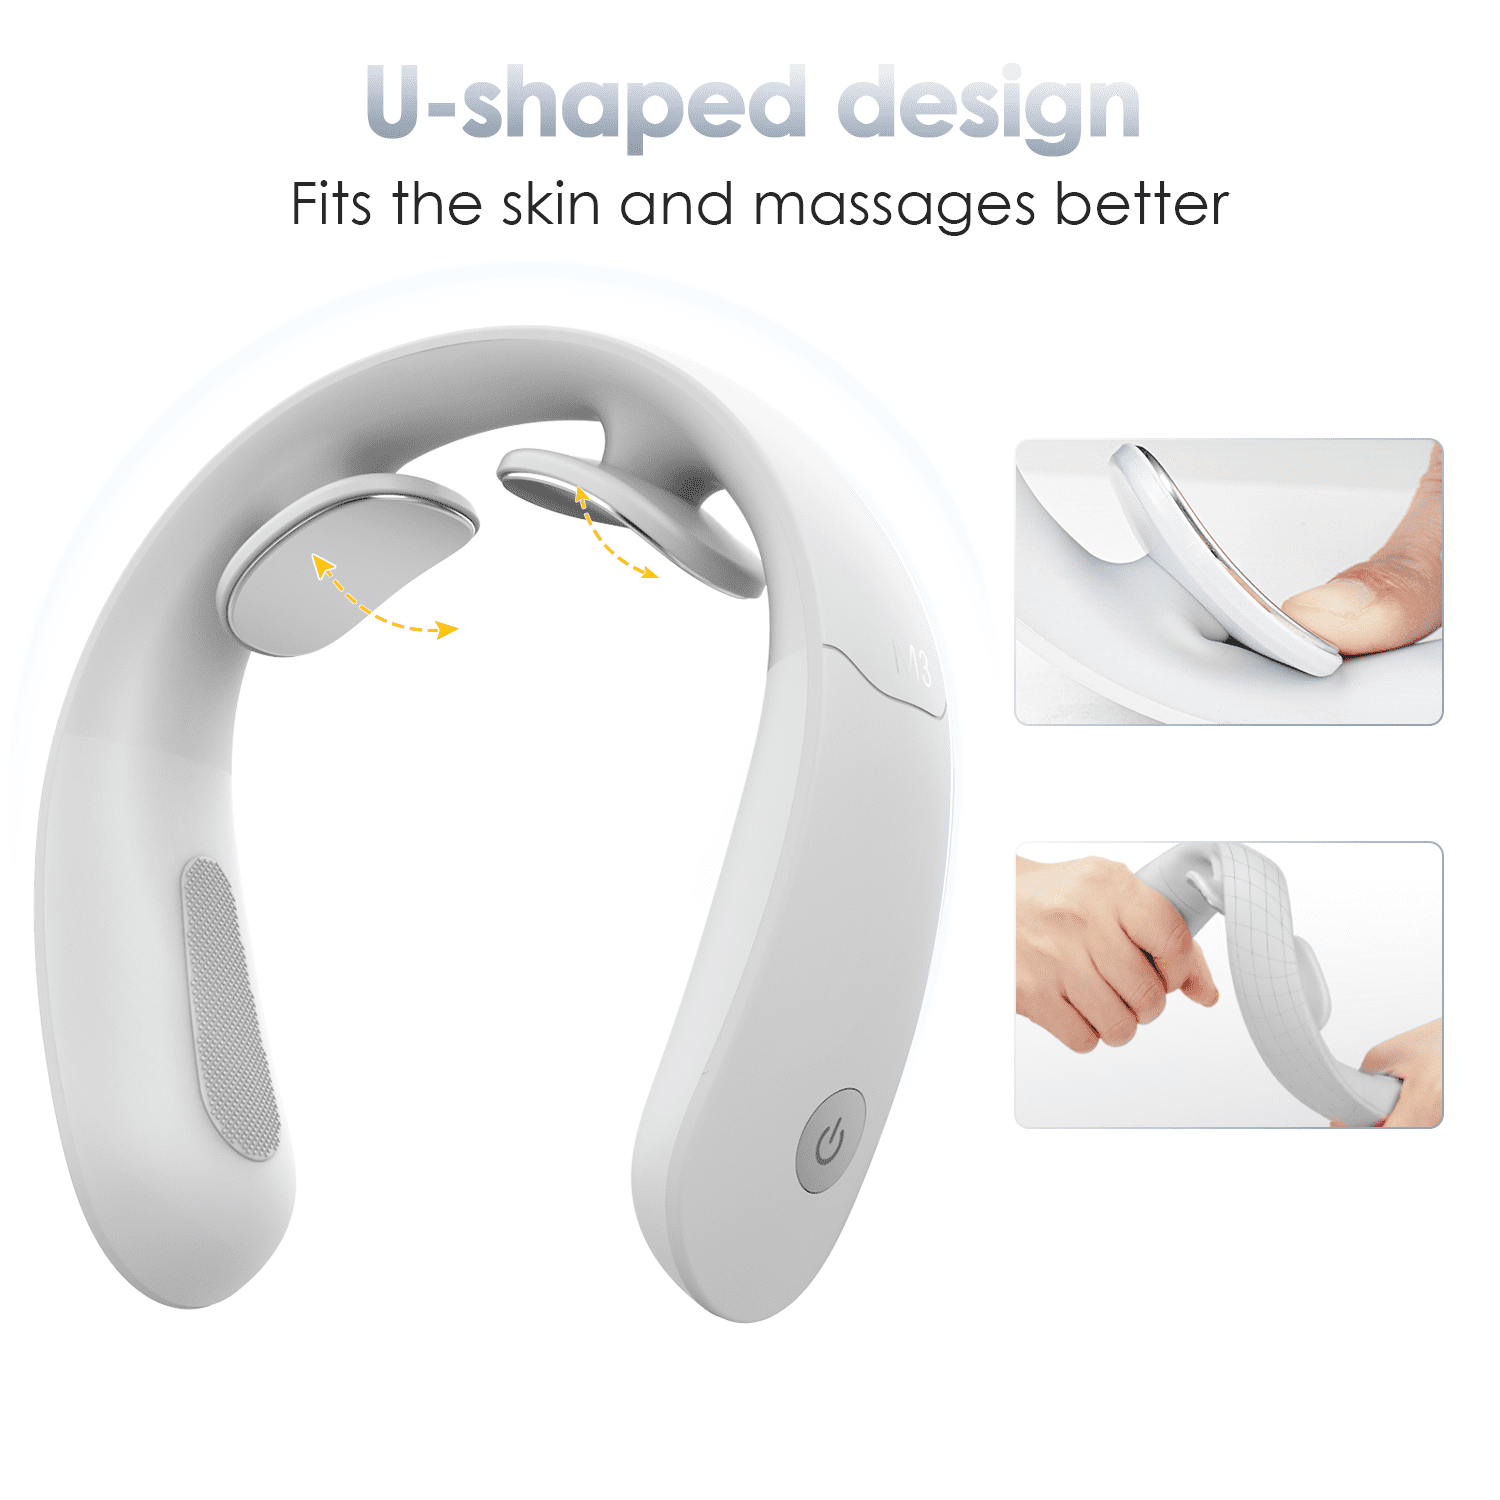 Relaxnecker Neck Massager, Best Intelligent Neck Massager, 4 Massage Modes,  15 Levels of Intensity, Pain Relief & Relaxation in Just 3 Minutes for